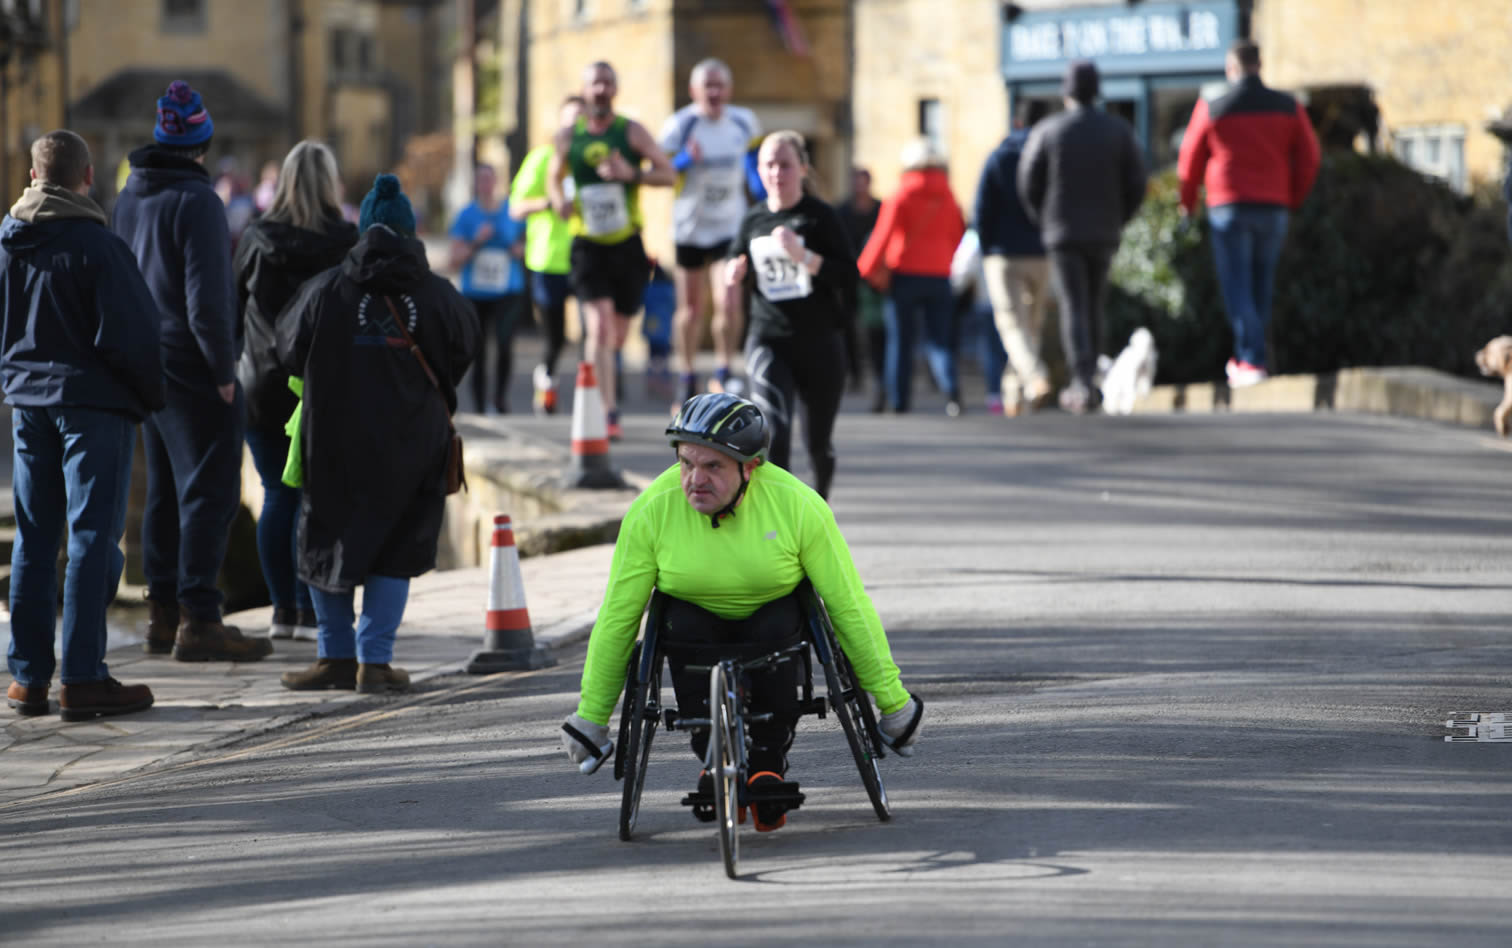 Wheelchair racer Les Hampton from Cheltenham & County Harriers provided an inspiring performance finishing in 49:24.